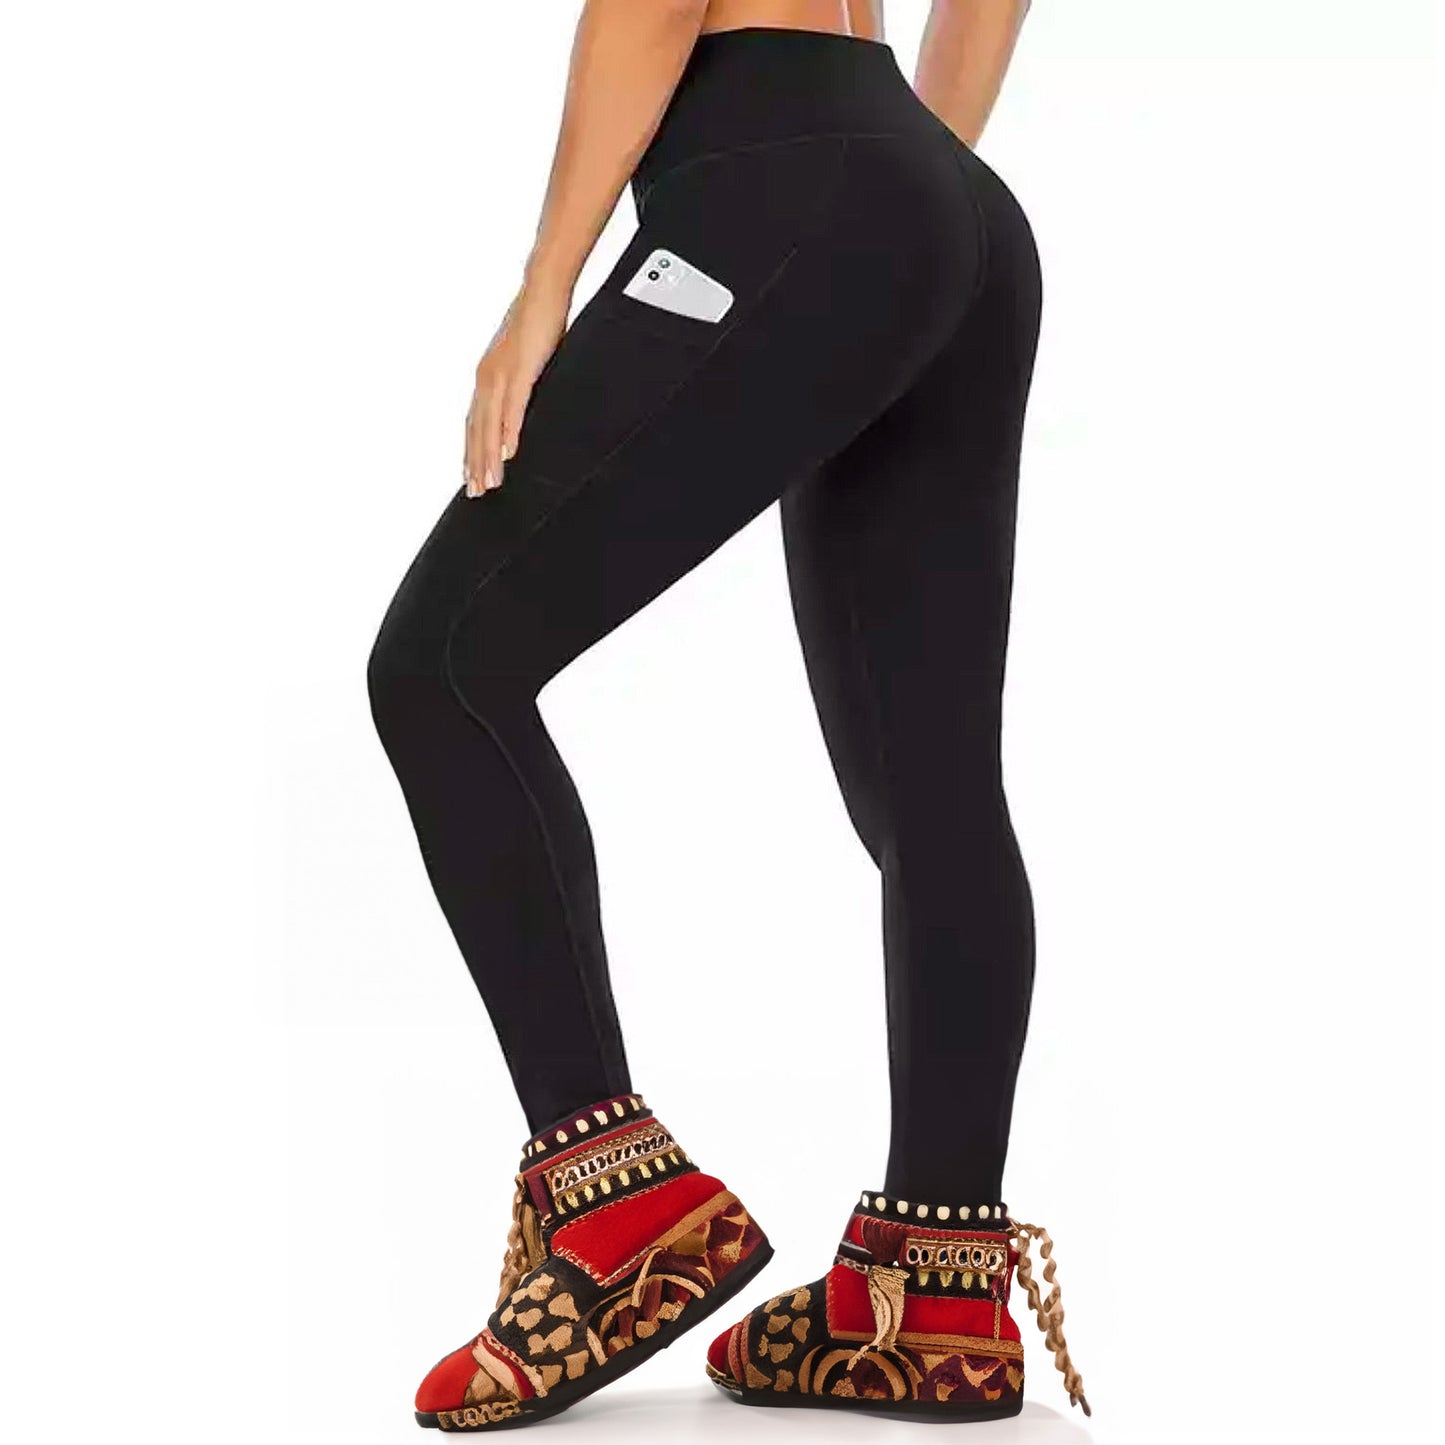 Enclave Thick Thermal Leggings